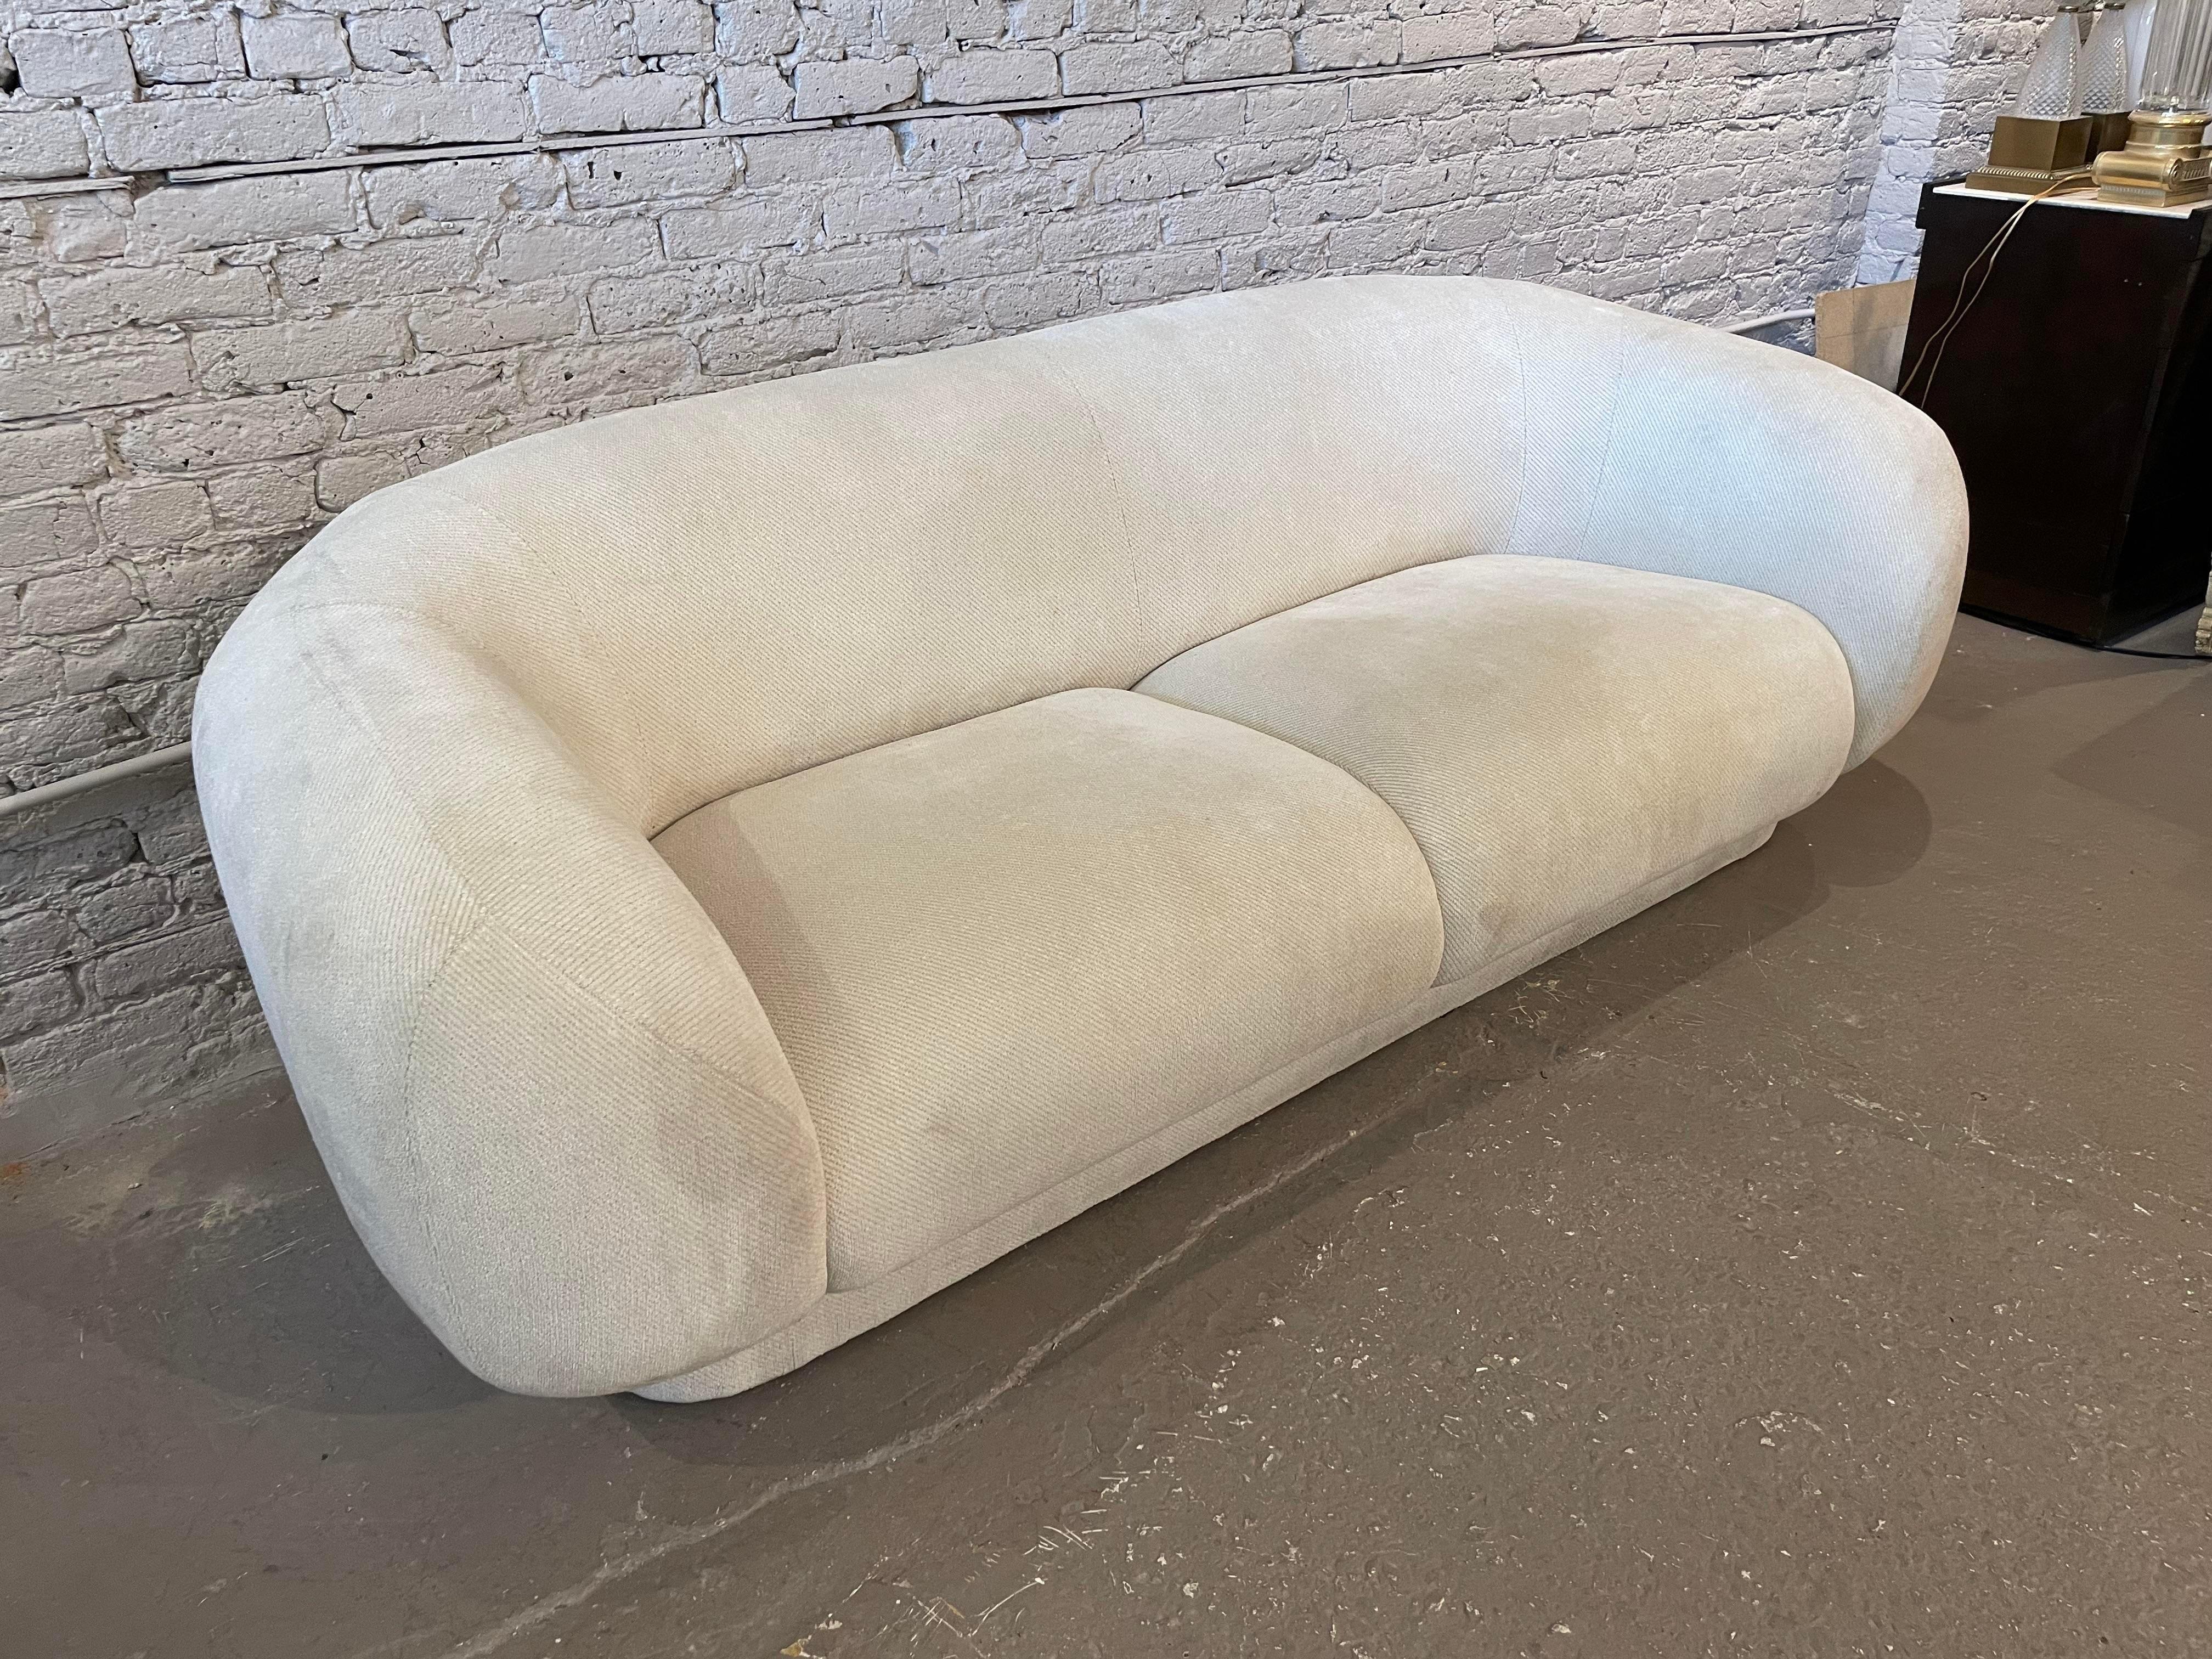 Love this shape. In excellent condition but I recommend a deep cleaning or new upholstery. The cushions are still nice and firm.
I think this was made by Directional based on the design and quality but it’s not labeled.